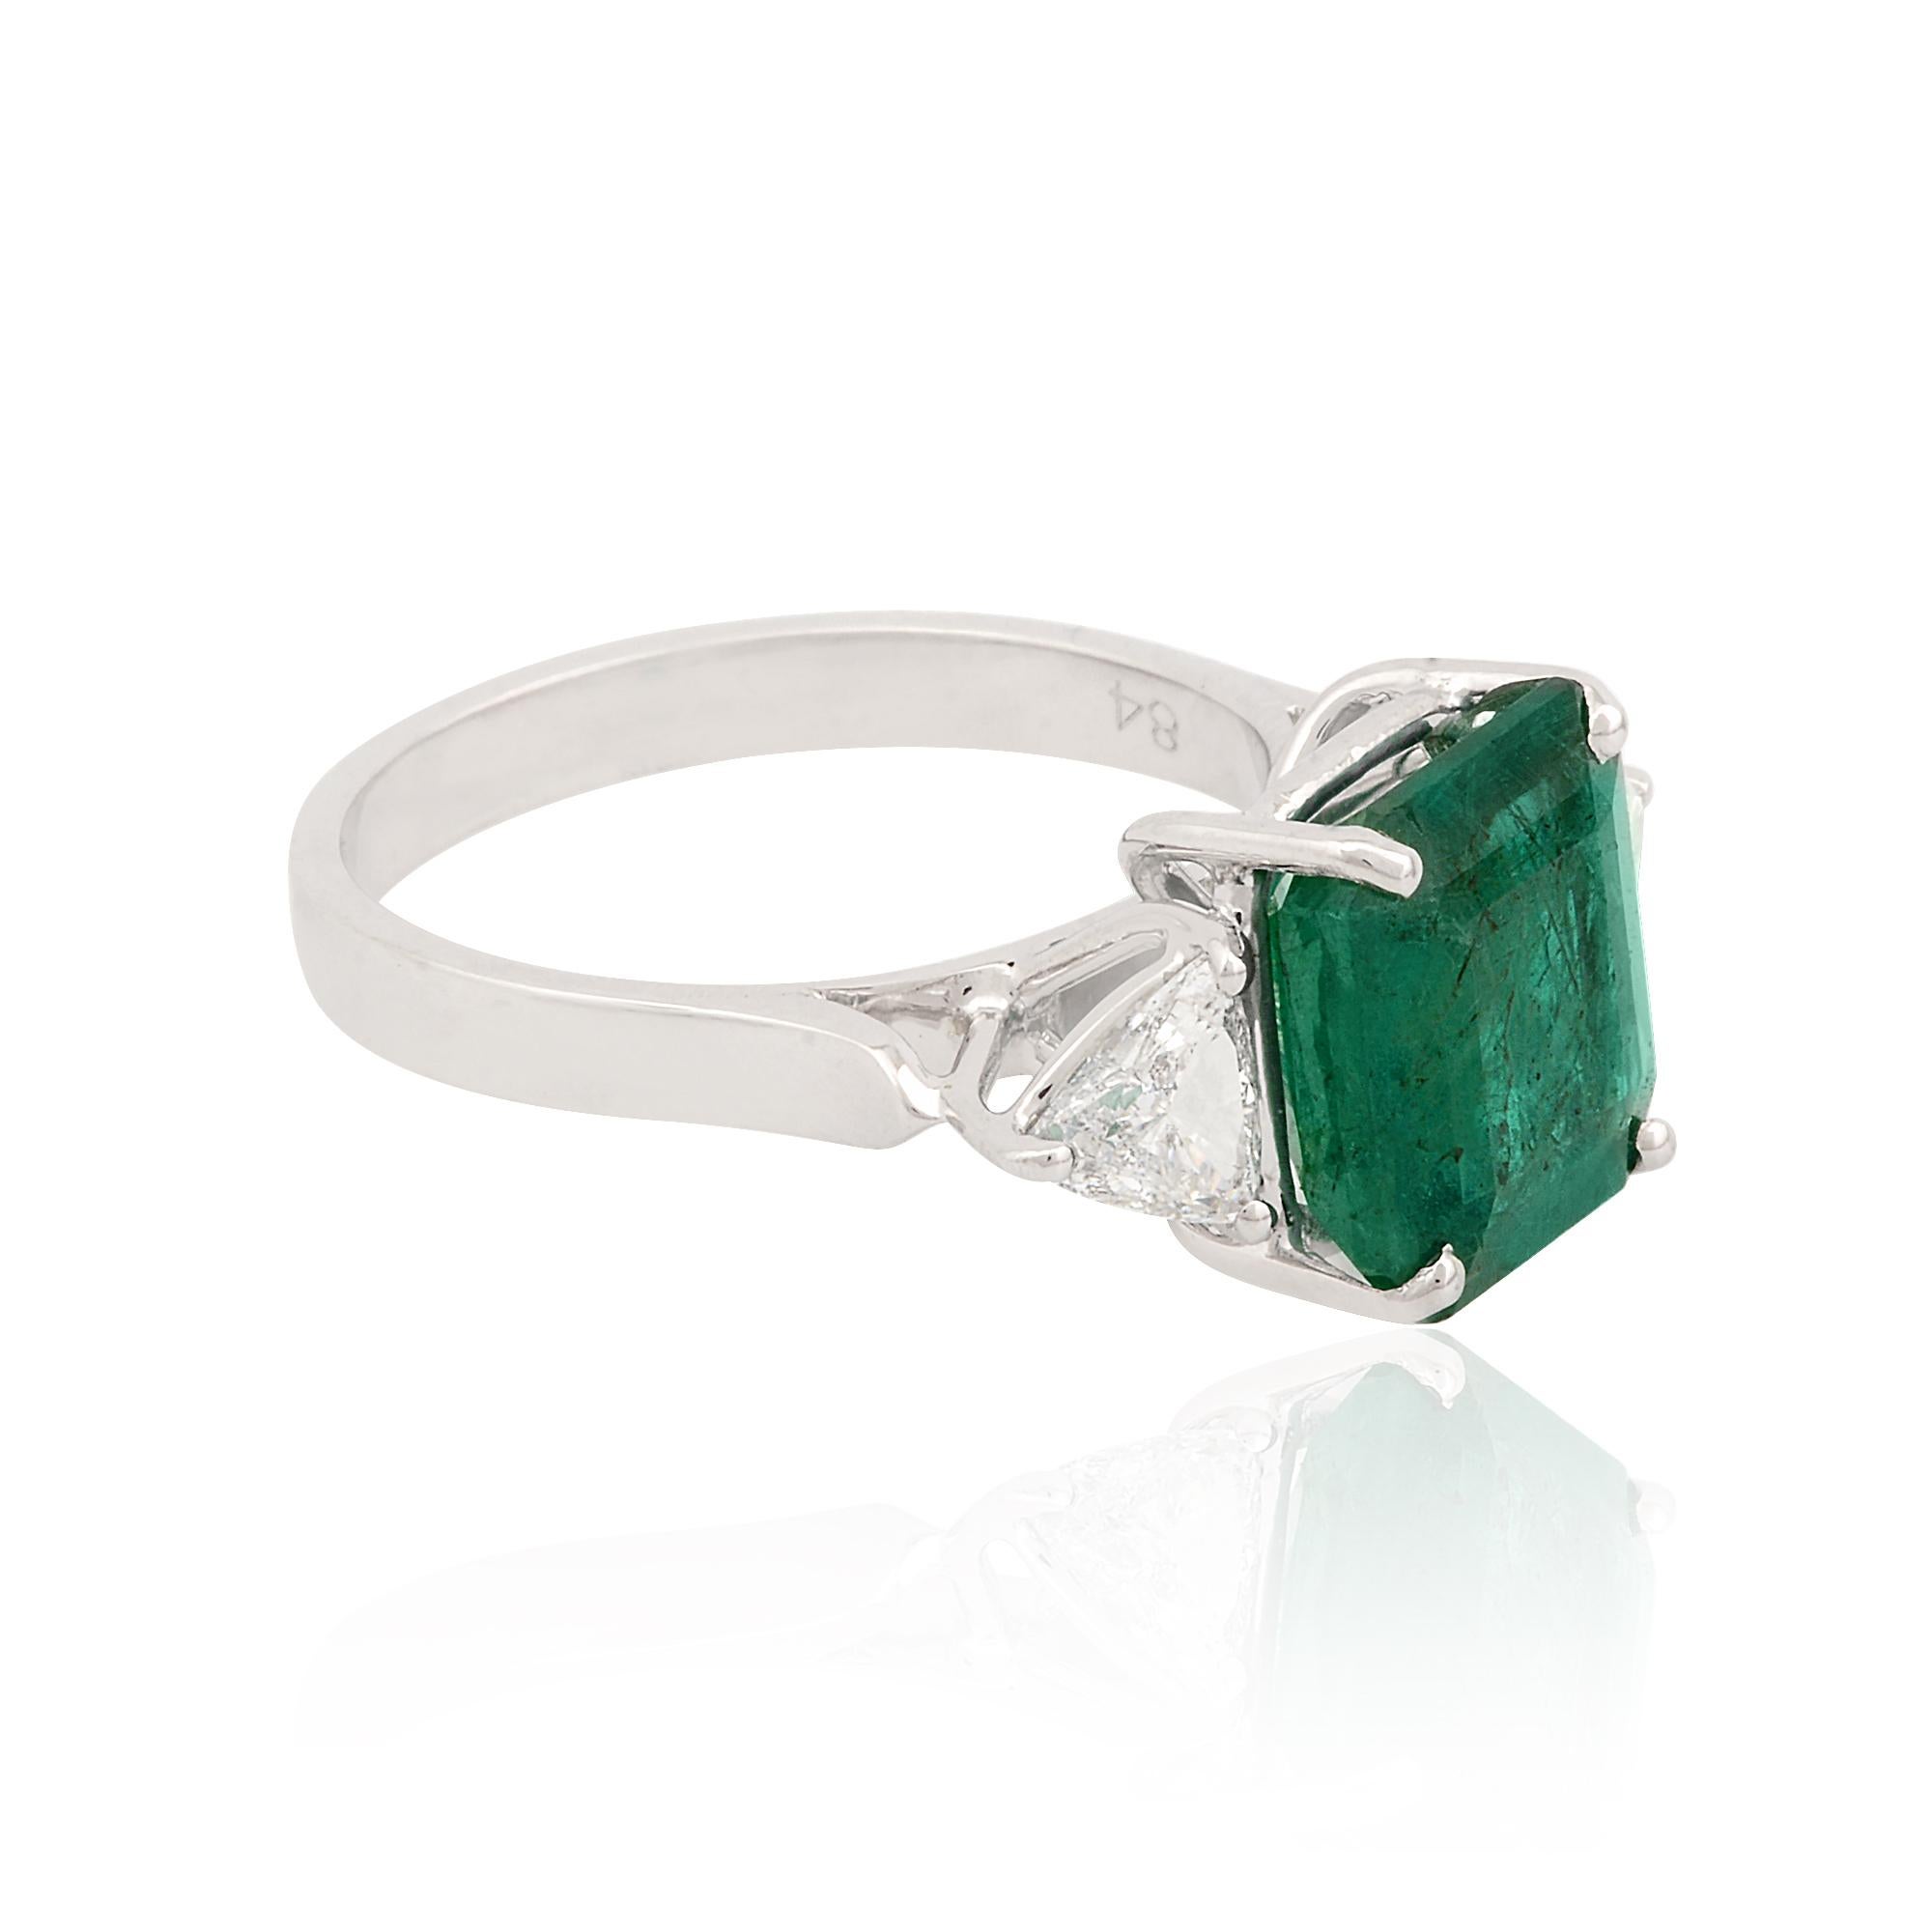 Expertly set in a lustrous solid 18k white gold band, this ring exudes luxury and refinement at every angle. The brilliance of the emerald is further enhanced by a halo of dazzling round-cut diamonds, meticulously arranged to accentuate its natural